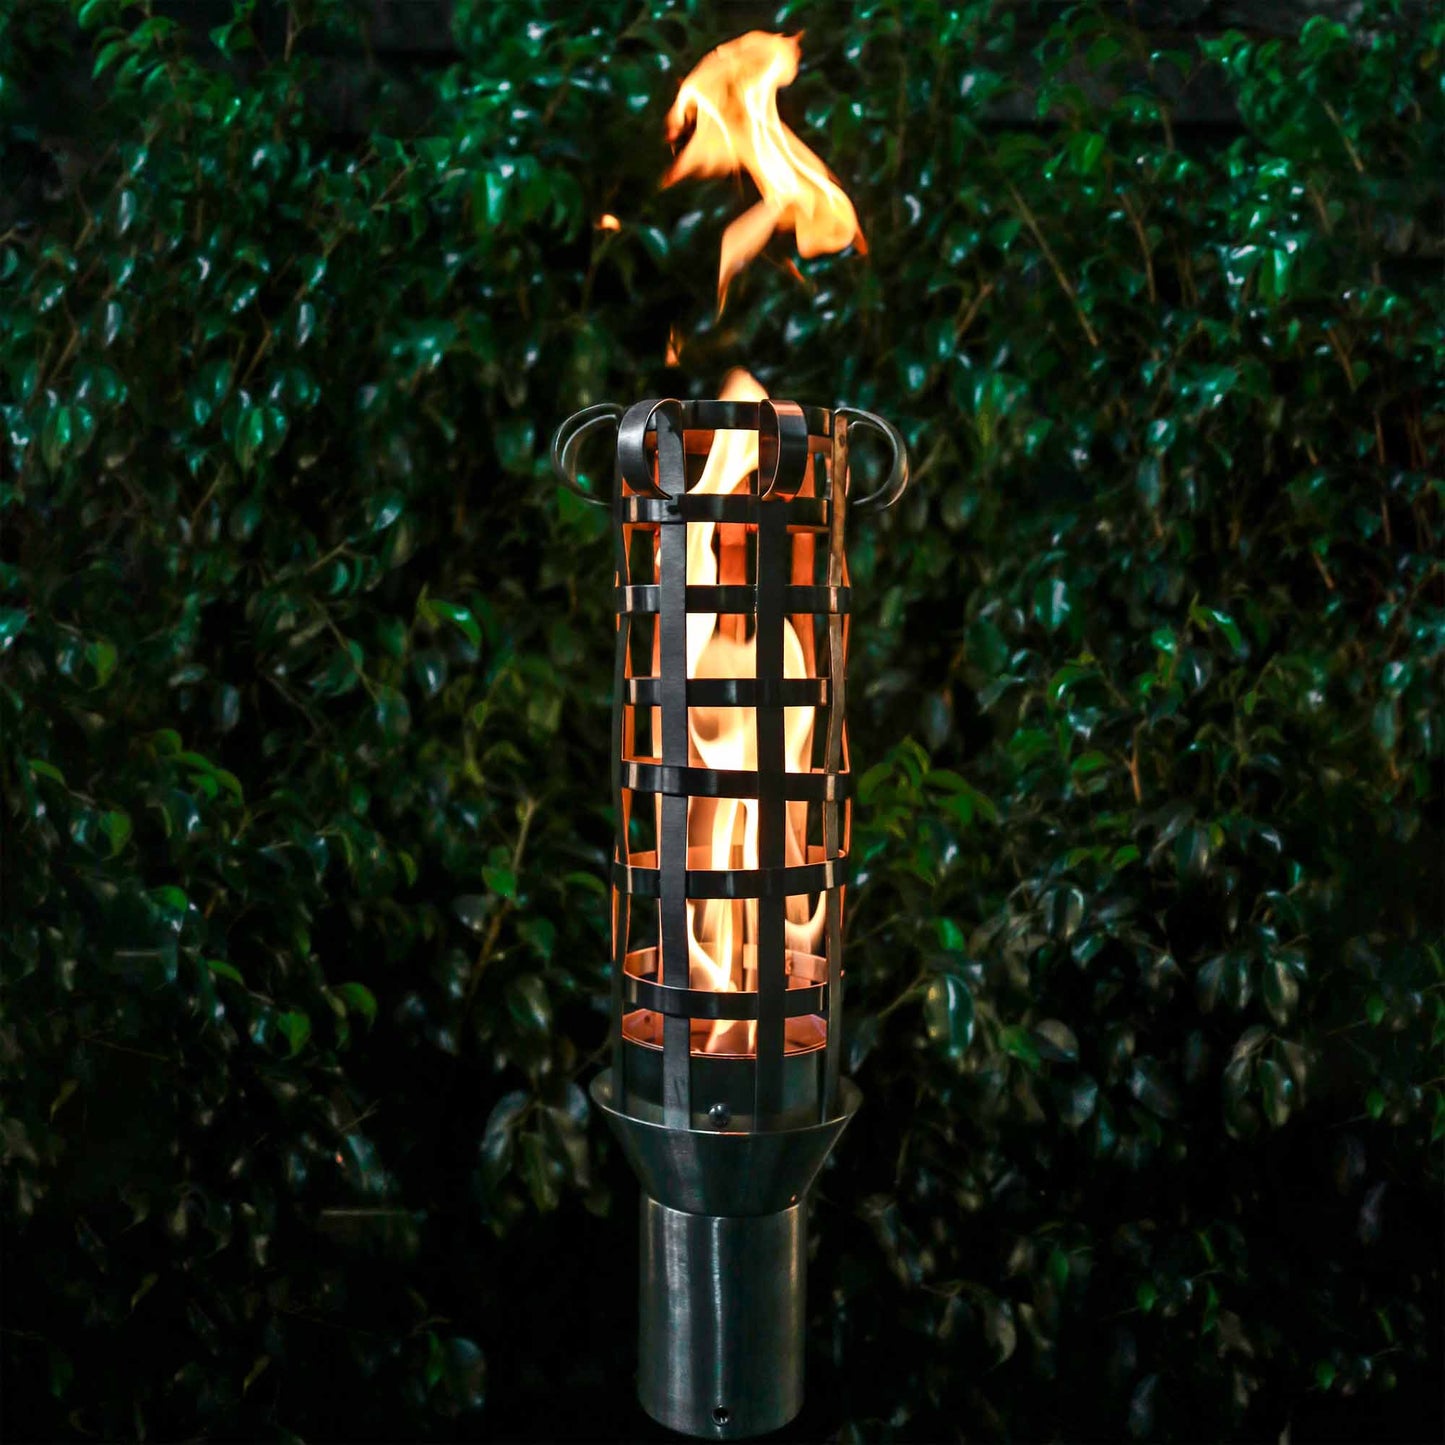 Woven Original TOP Torch & Post Complete Kit - Stainless Steel - Liquid Propane-Novel Home